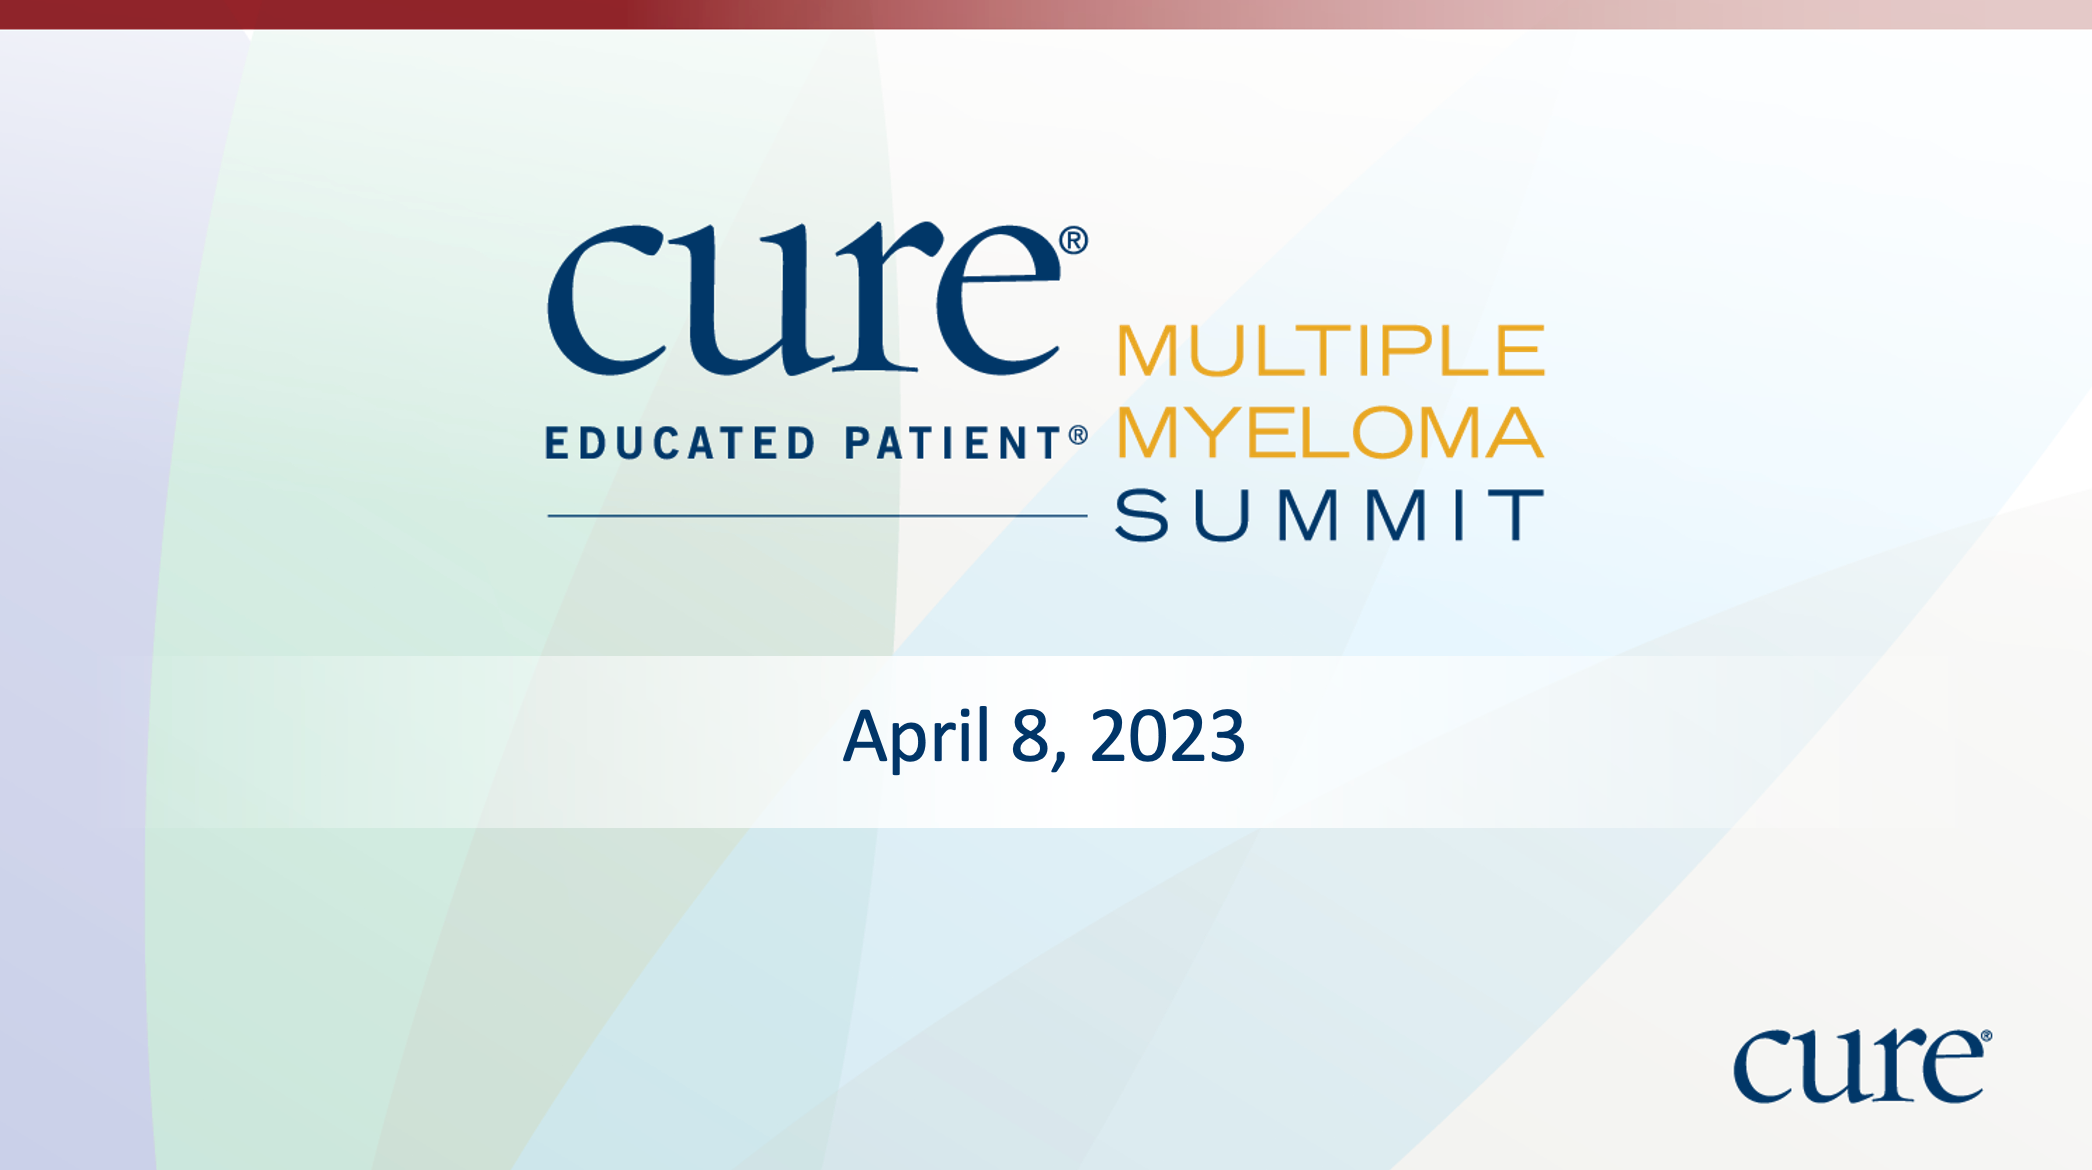 CURE Educated Patient Multiple Myeloma Summit